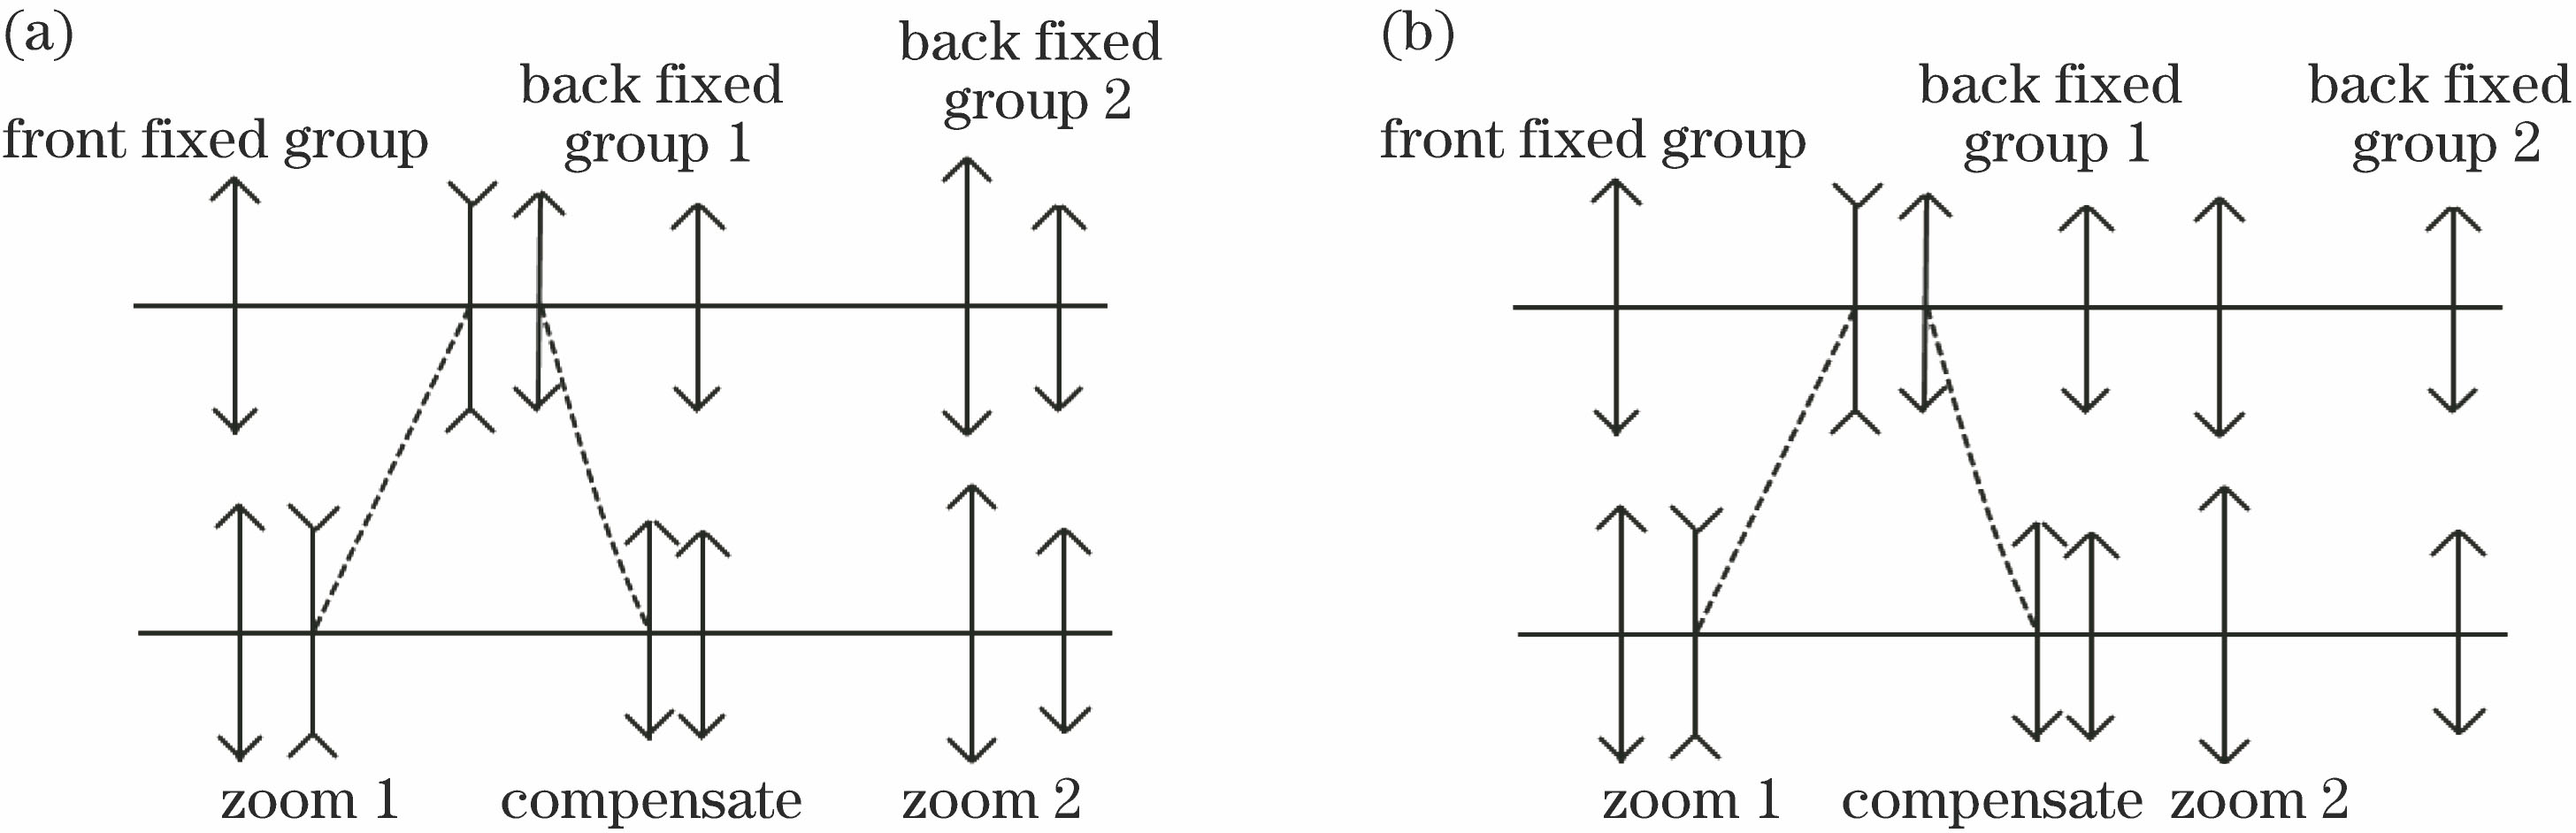 Zoom principle diagrams of optical system. (a) State 1; (b) state 2